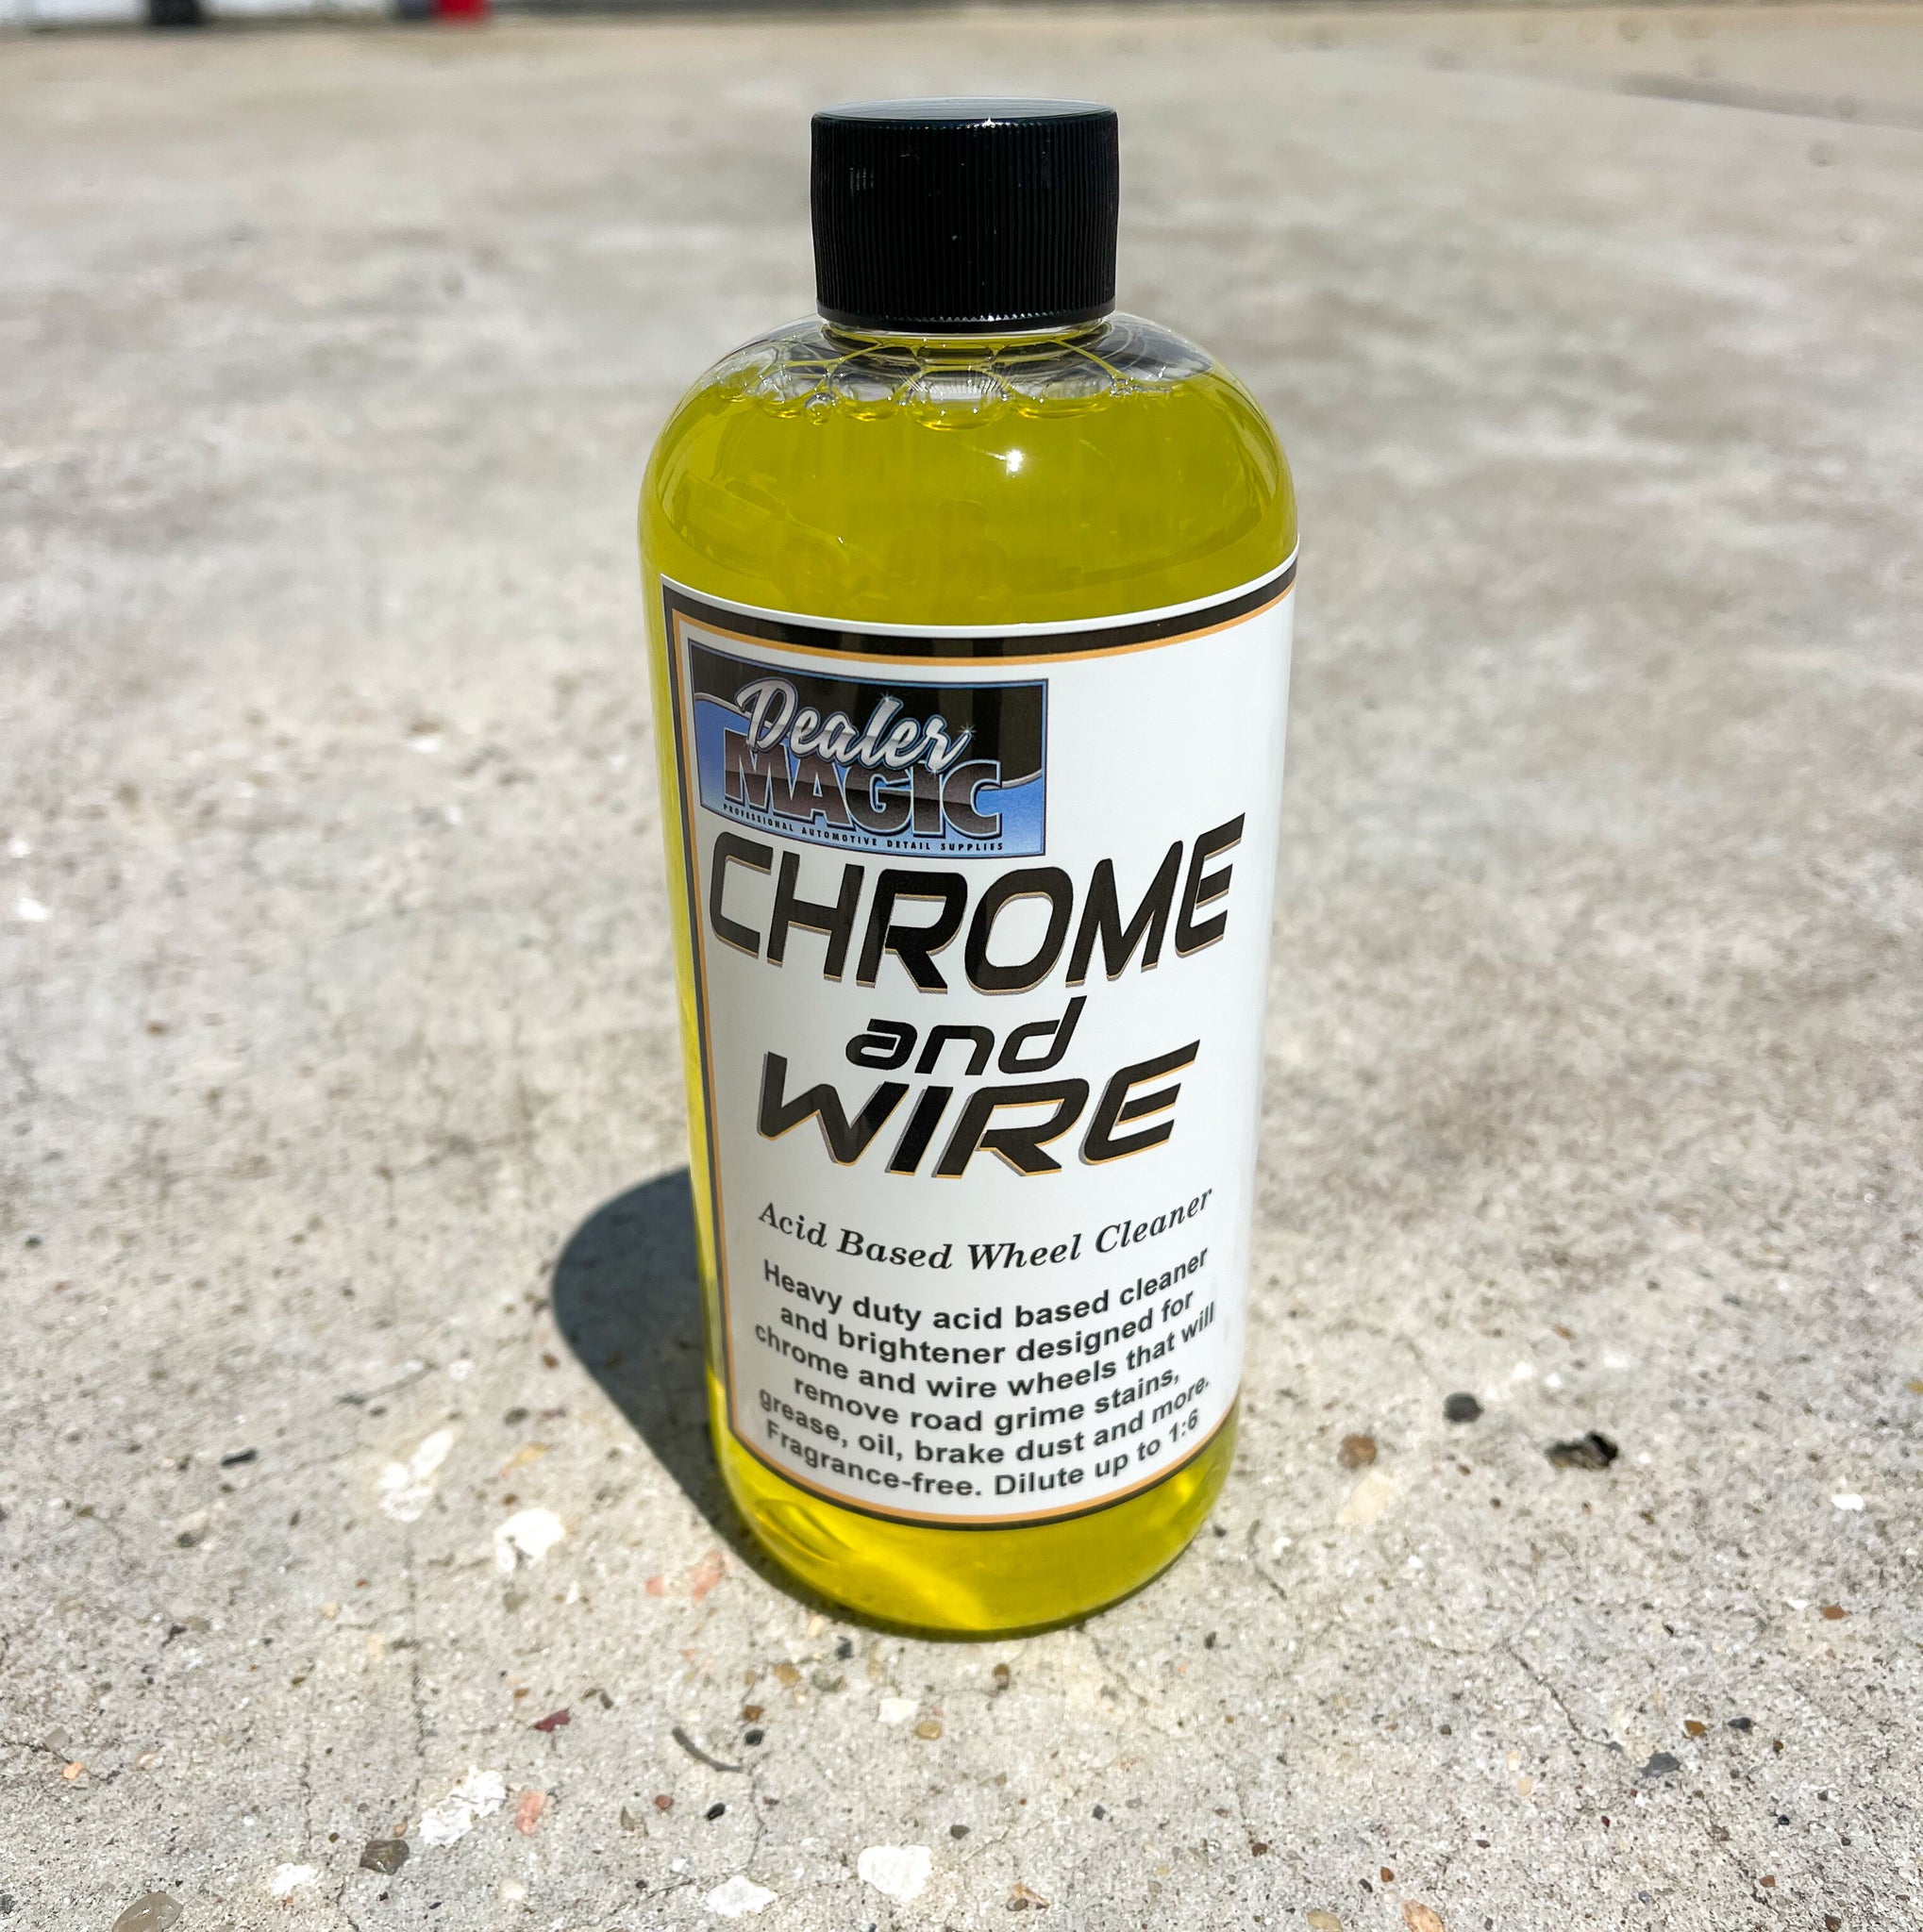 Chrome & Wire Wheel Cleaner